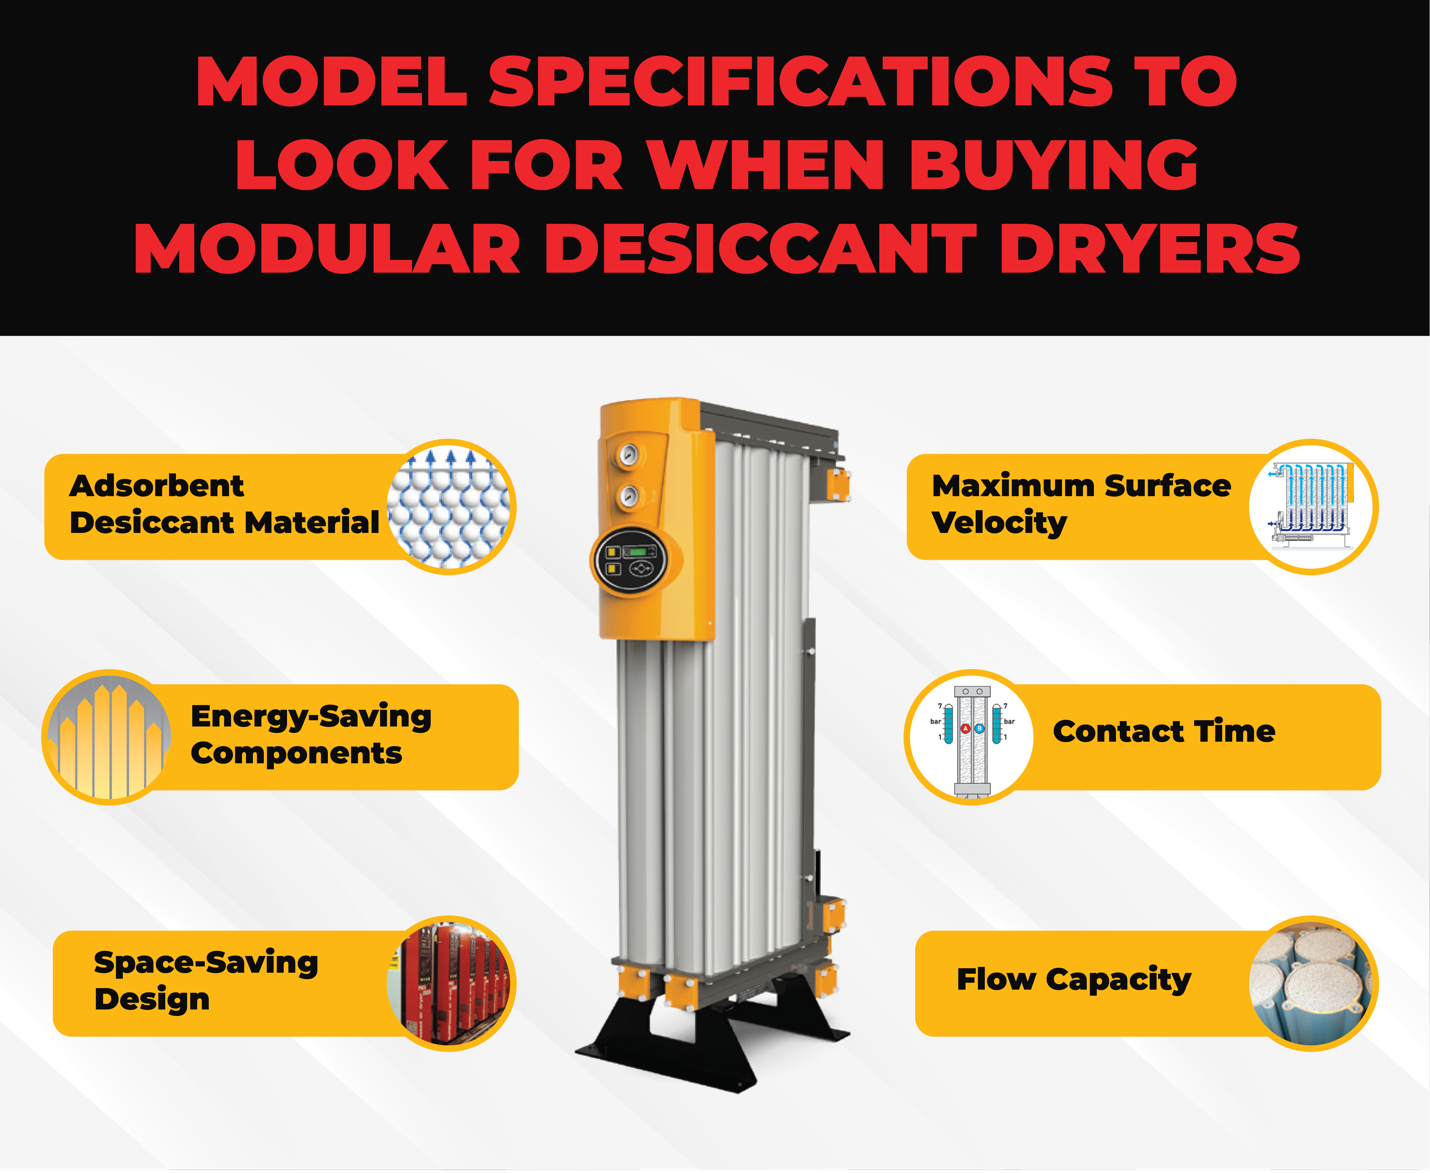 Model Specifications To Look For When Buying Modular Desiccant Dryers